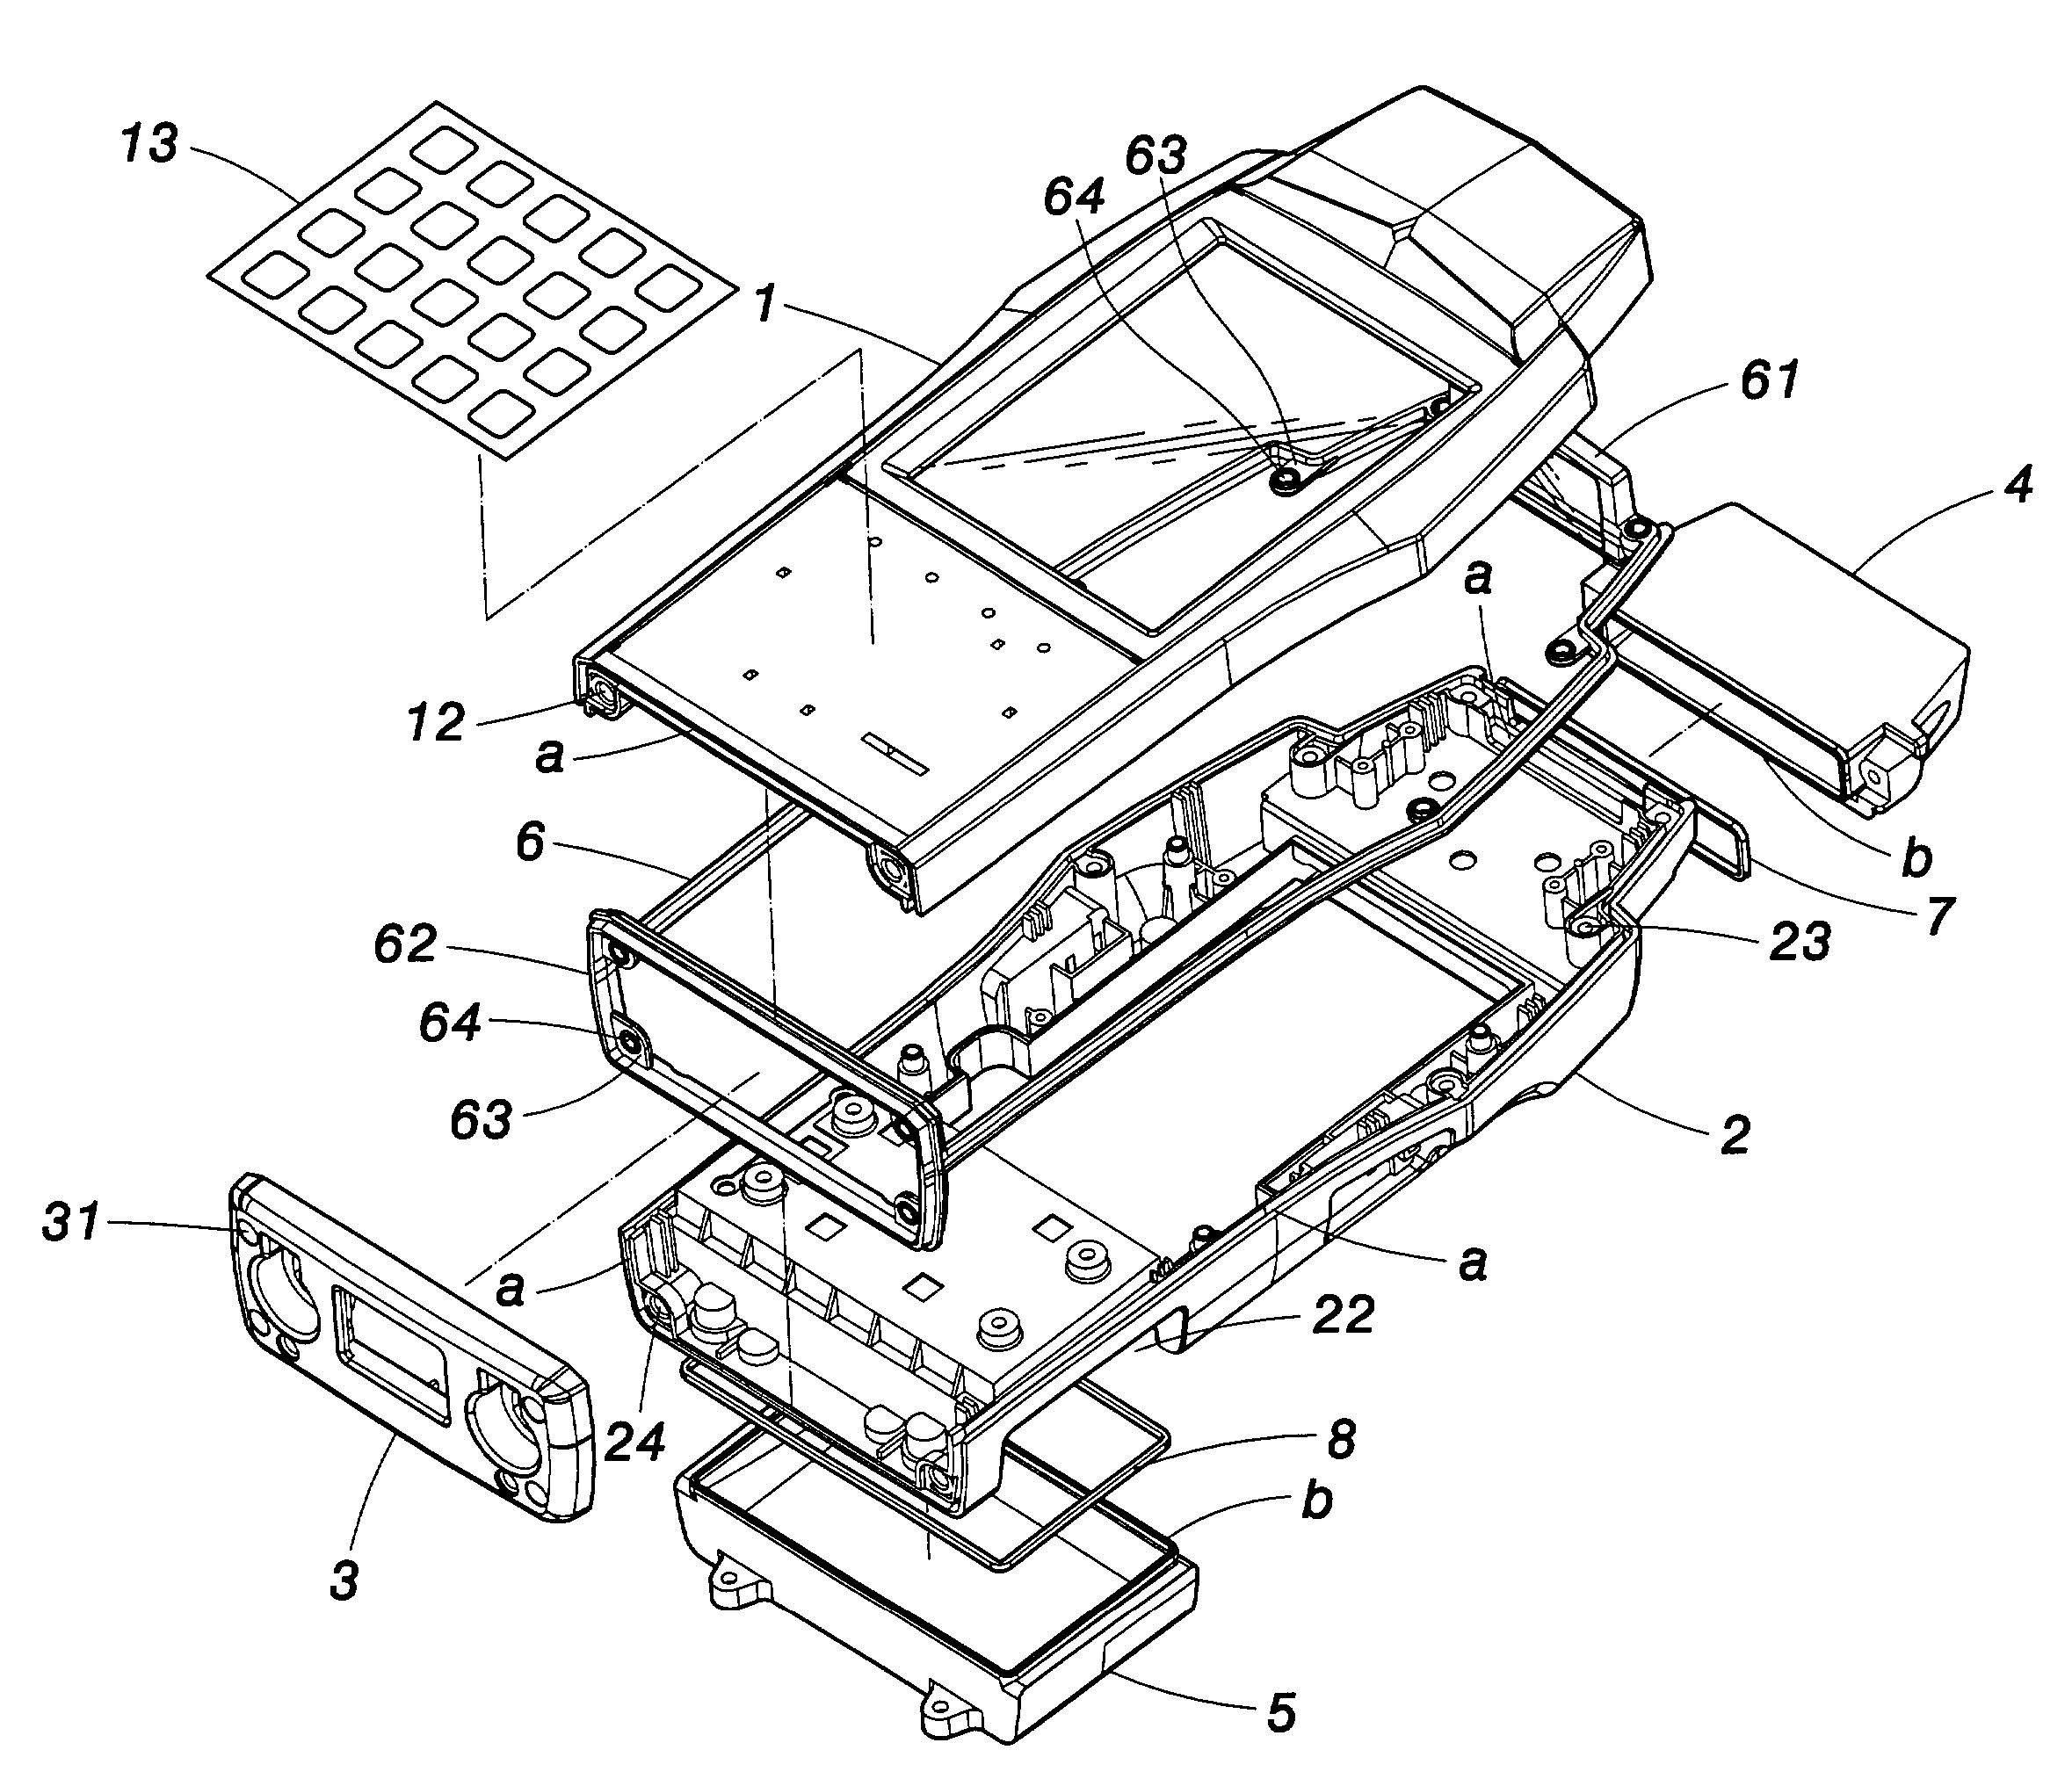 Waterproof structure of handheld electronic device